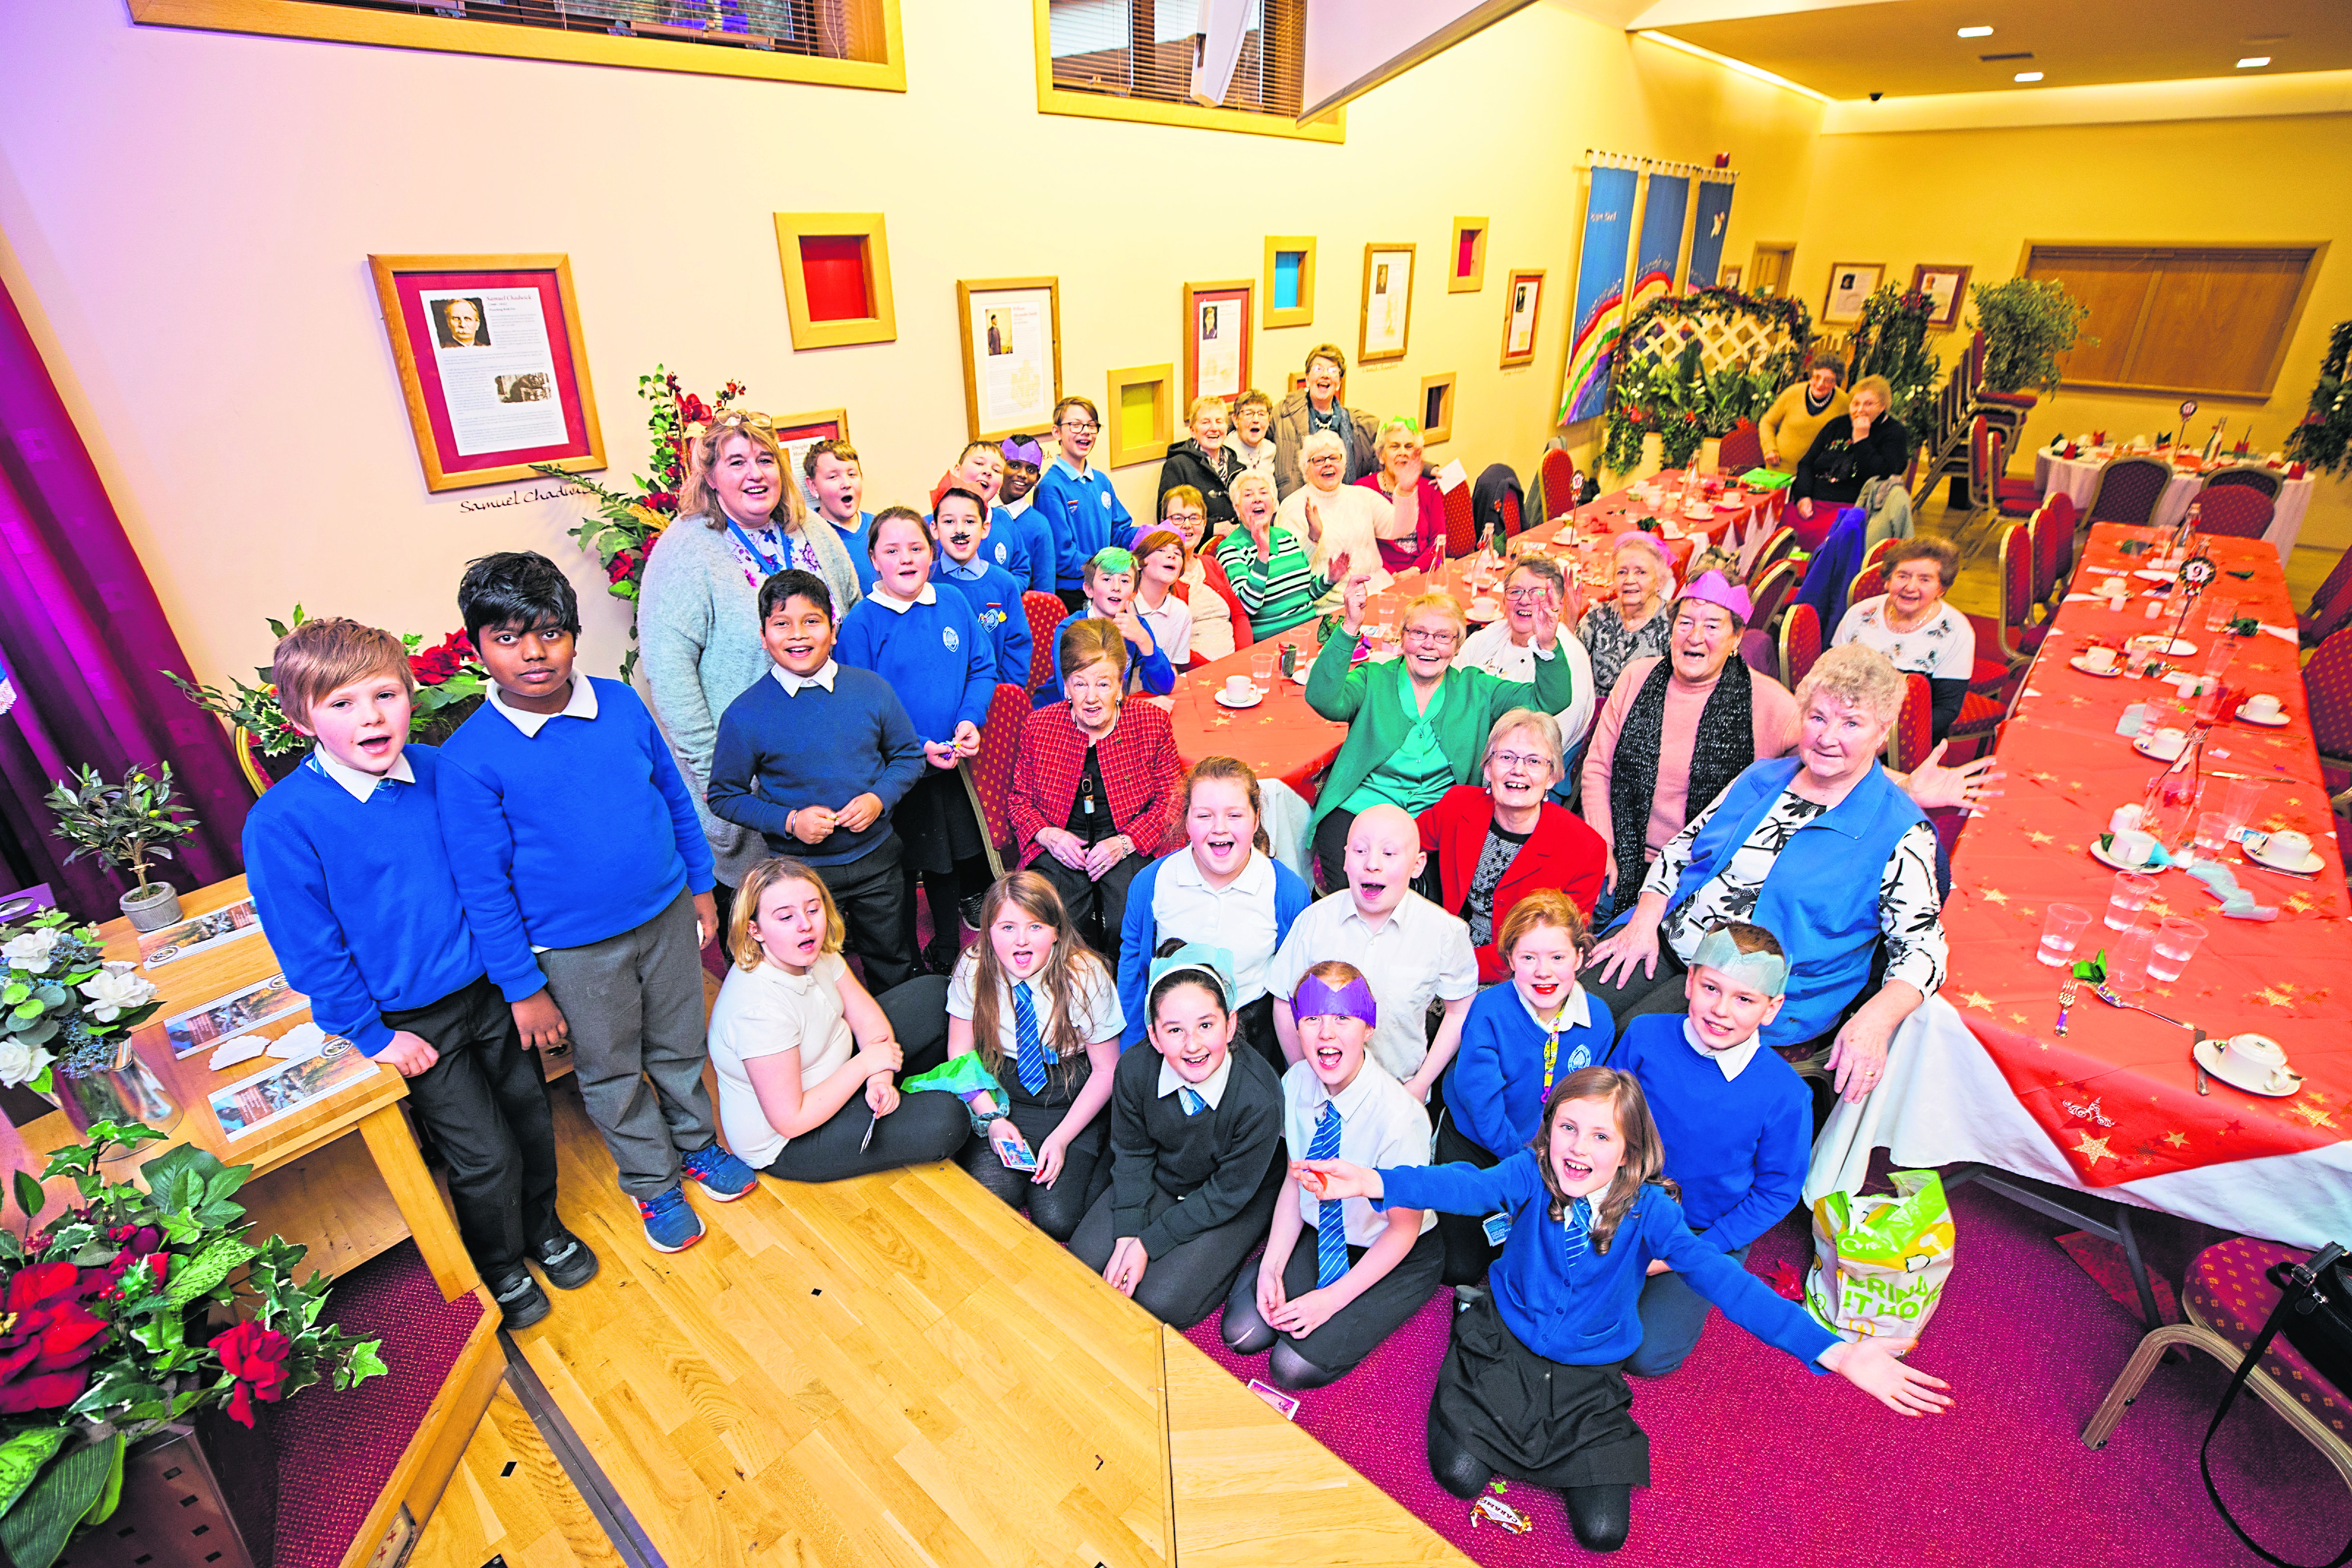 Children from St Ninians P5–6–7 and head teacher Sheona Glenville-Sutherland, back left, with Jane Milne, co founder and senior pastor, front right in red, and pensioners from the Letham area of Perth in the National Christian Outreach Centre, Riggs Road. Picture: Steve MacDougall.